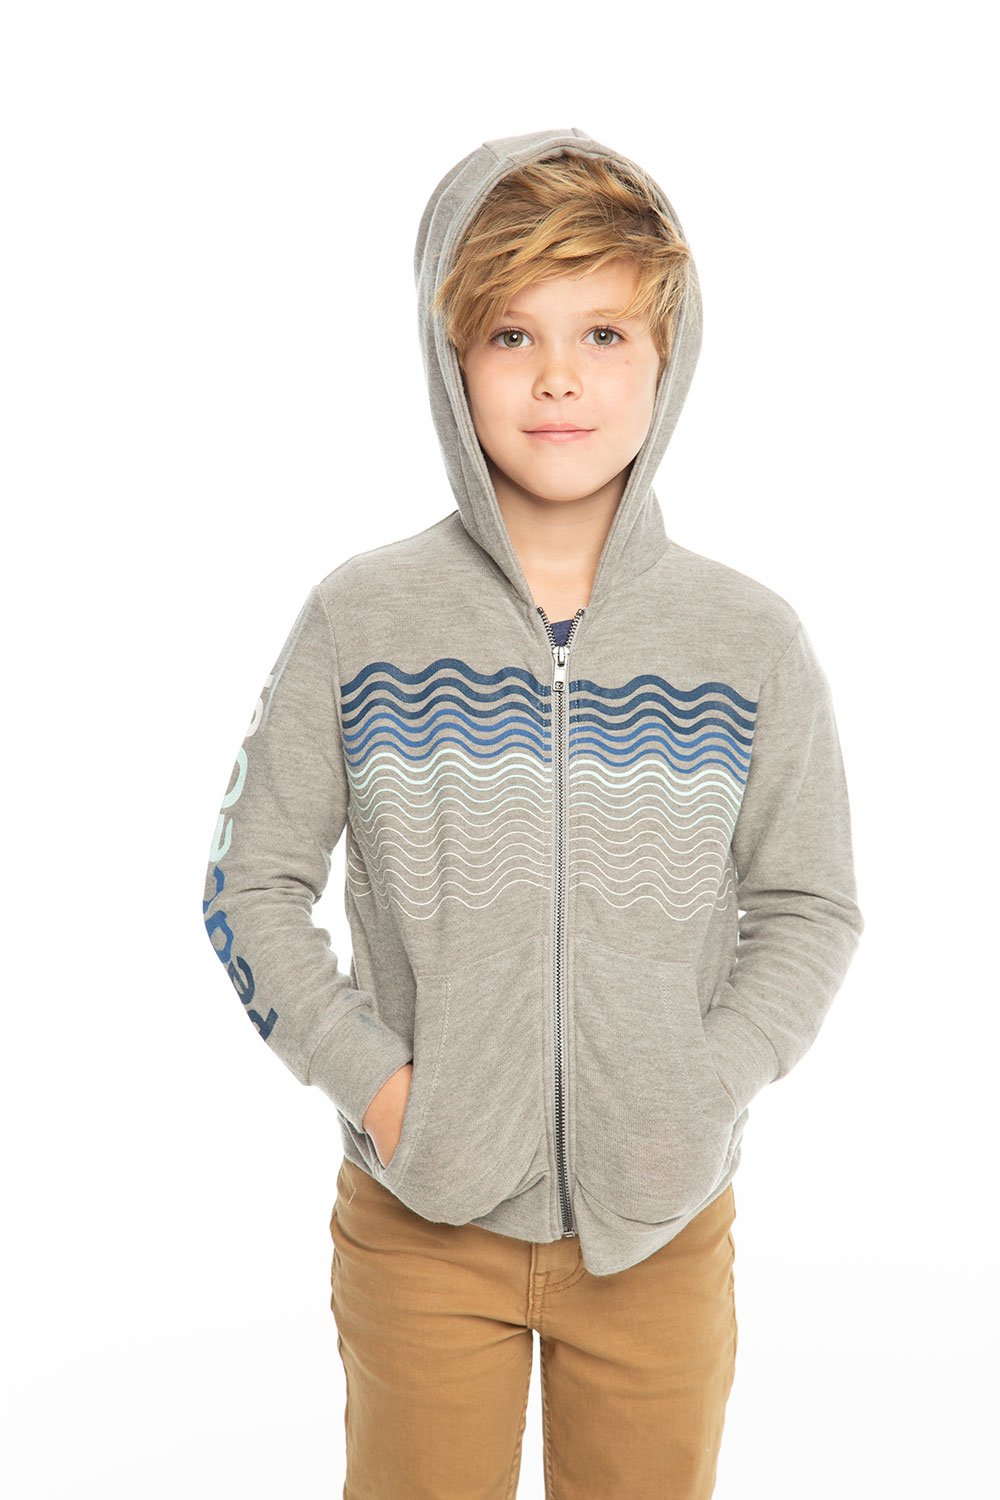 Chaser Kids - Boys Cozy Knit L/S Zip Up Hoodie in Heather Grey